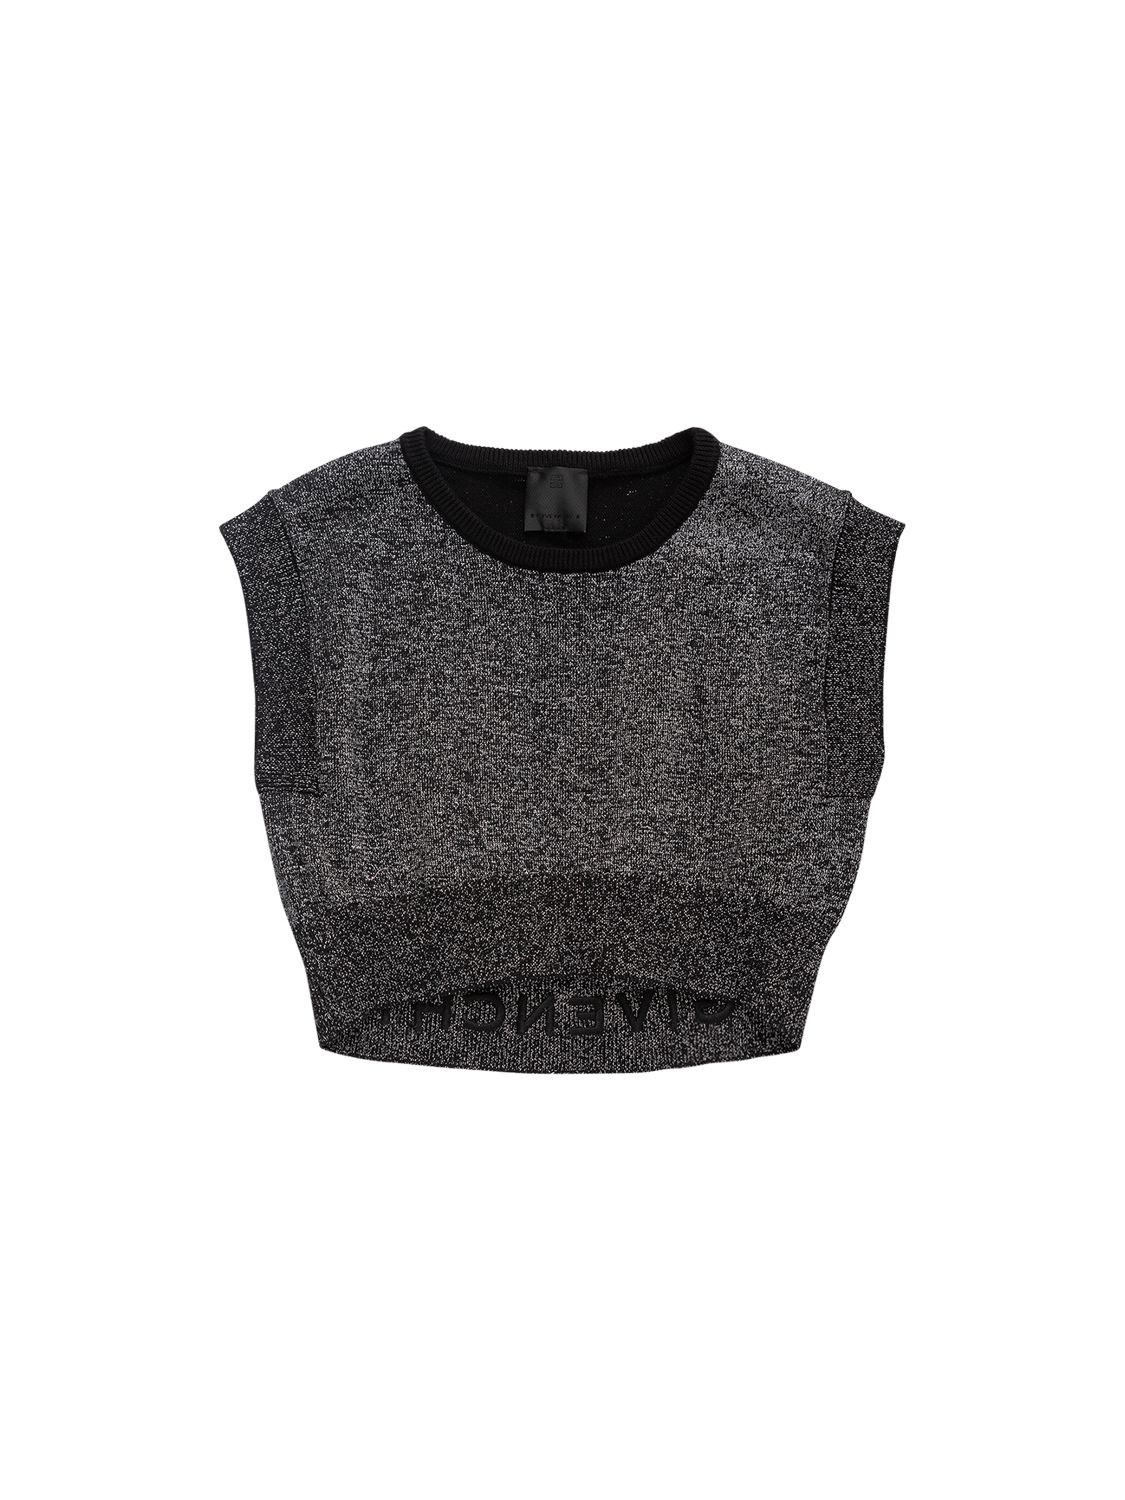 Givenchy Lurex Knit Cropped Top In Black/silver